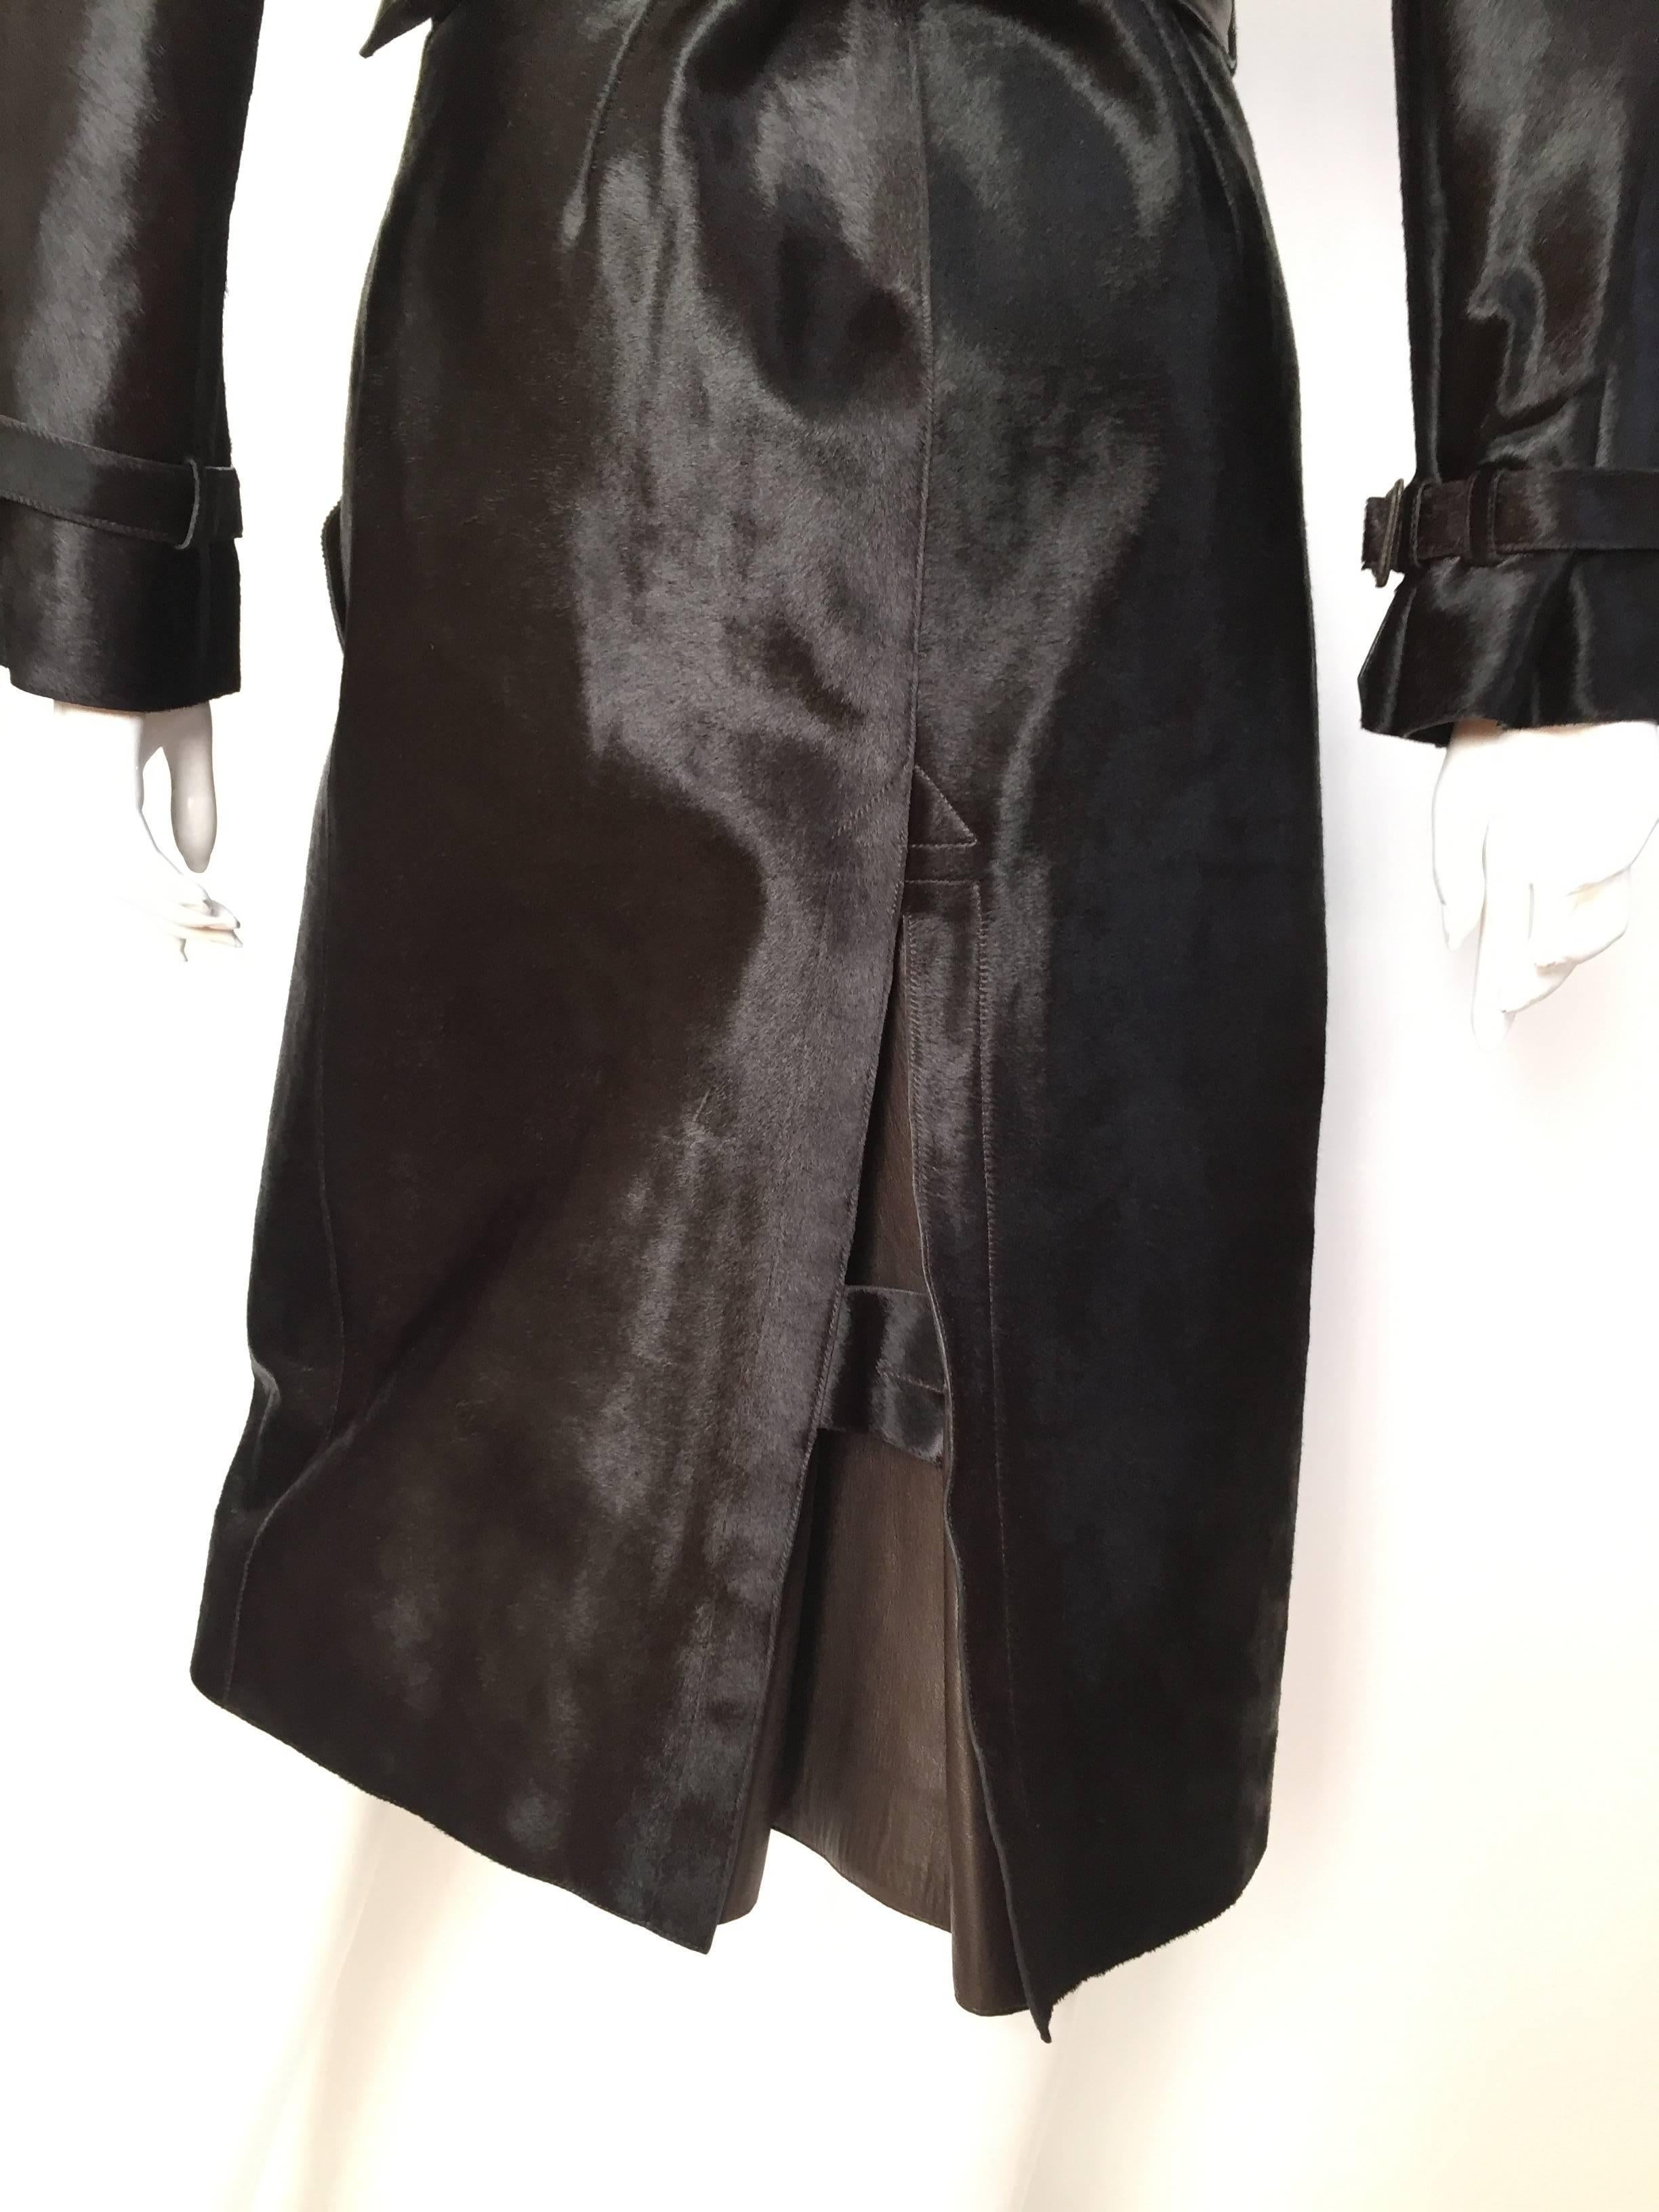 Hermes by Jean Paul Gaultier 2004 brown calf skin trench coat size 6. For Sale 2